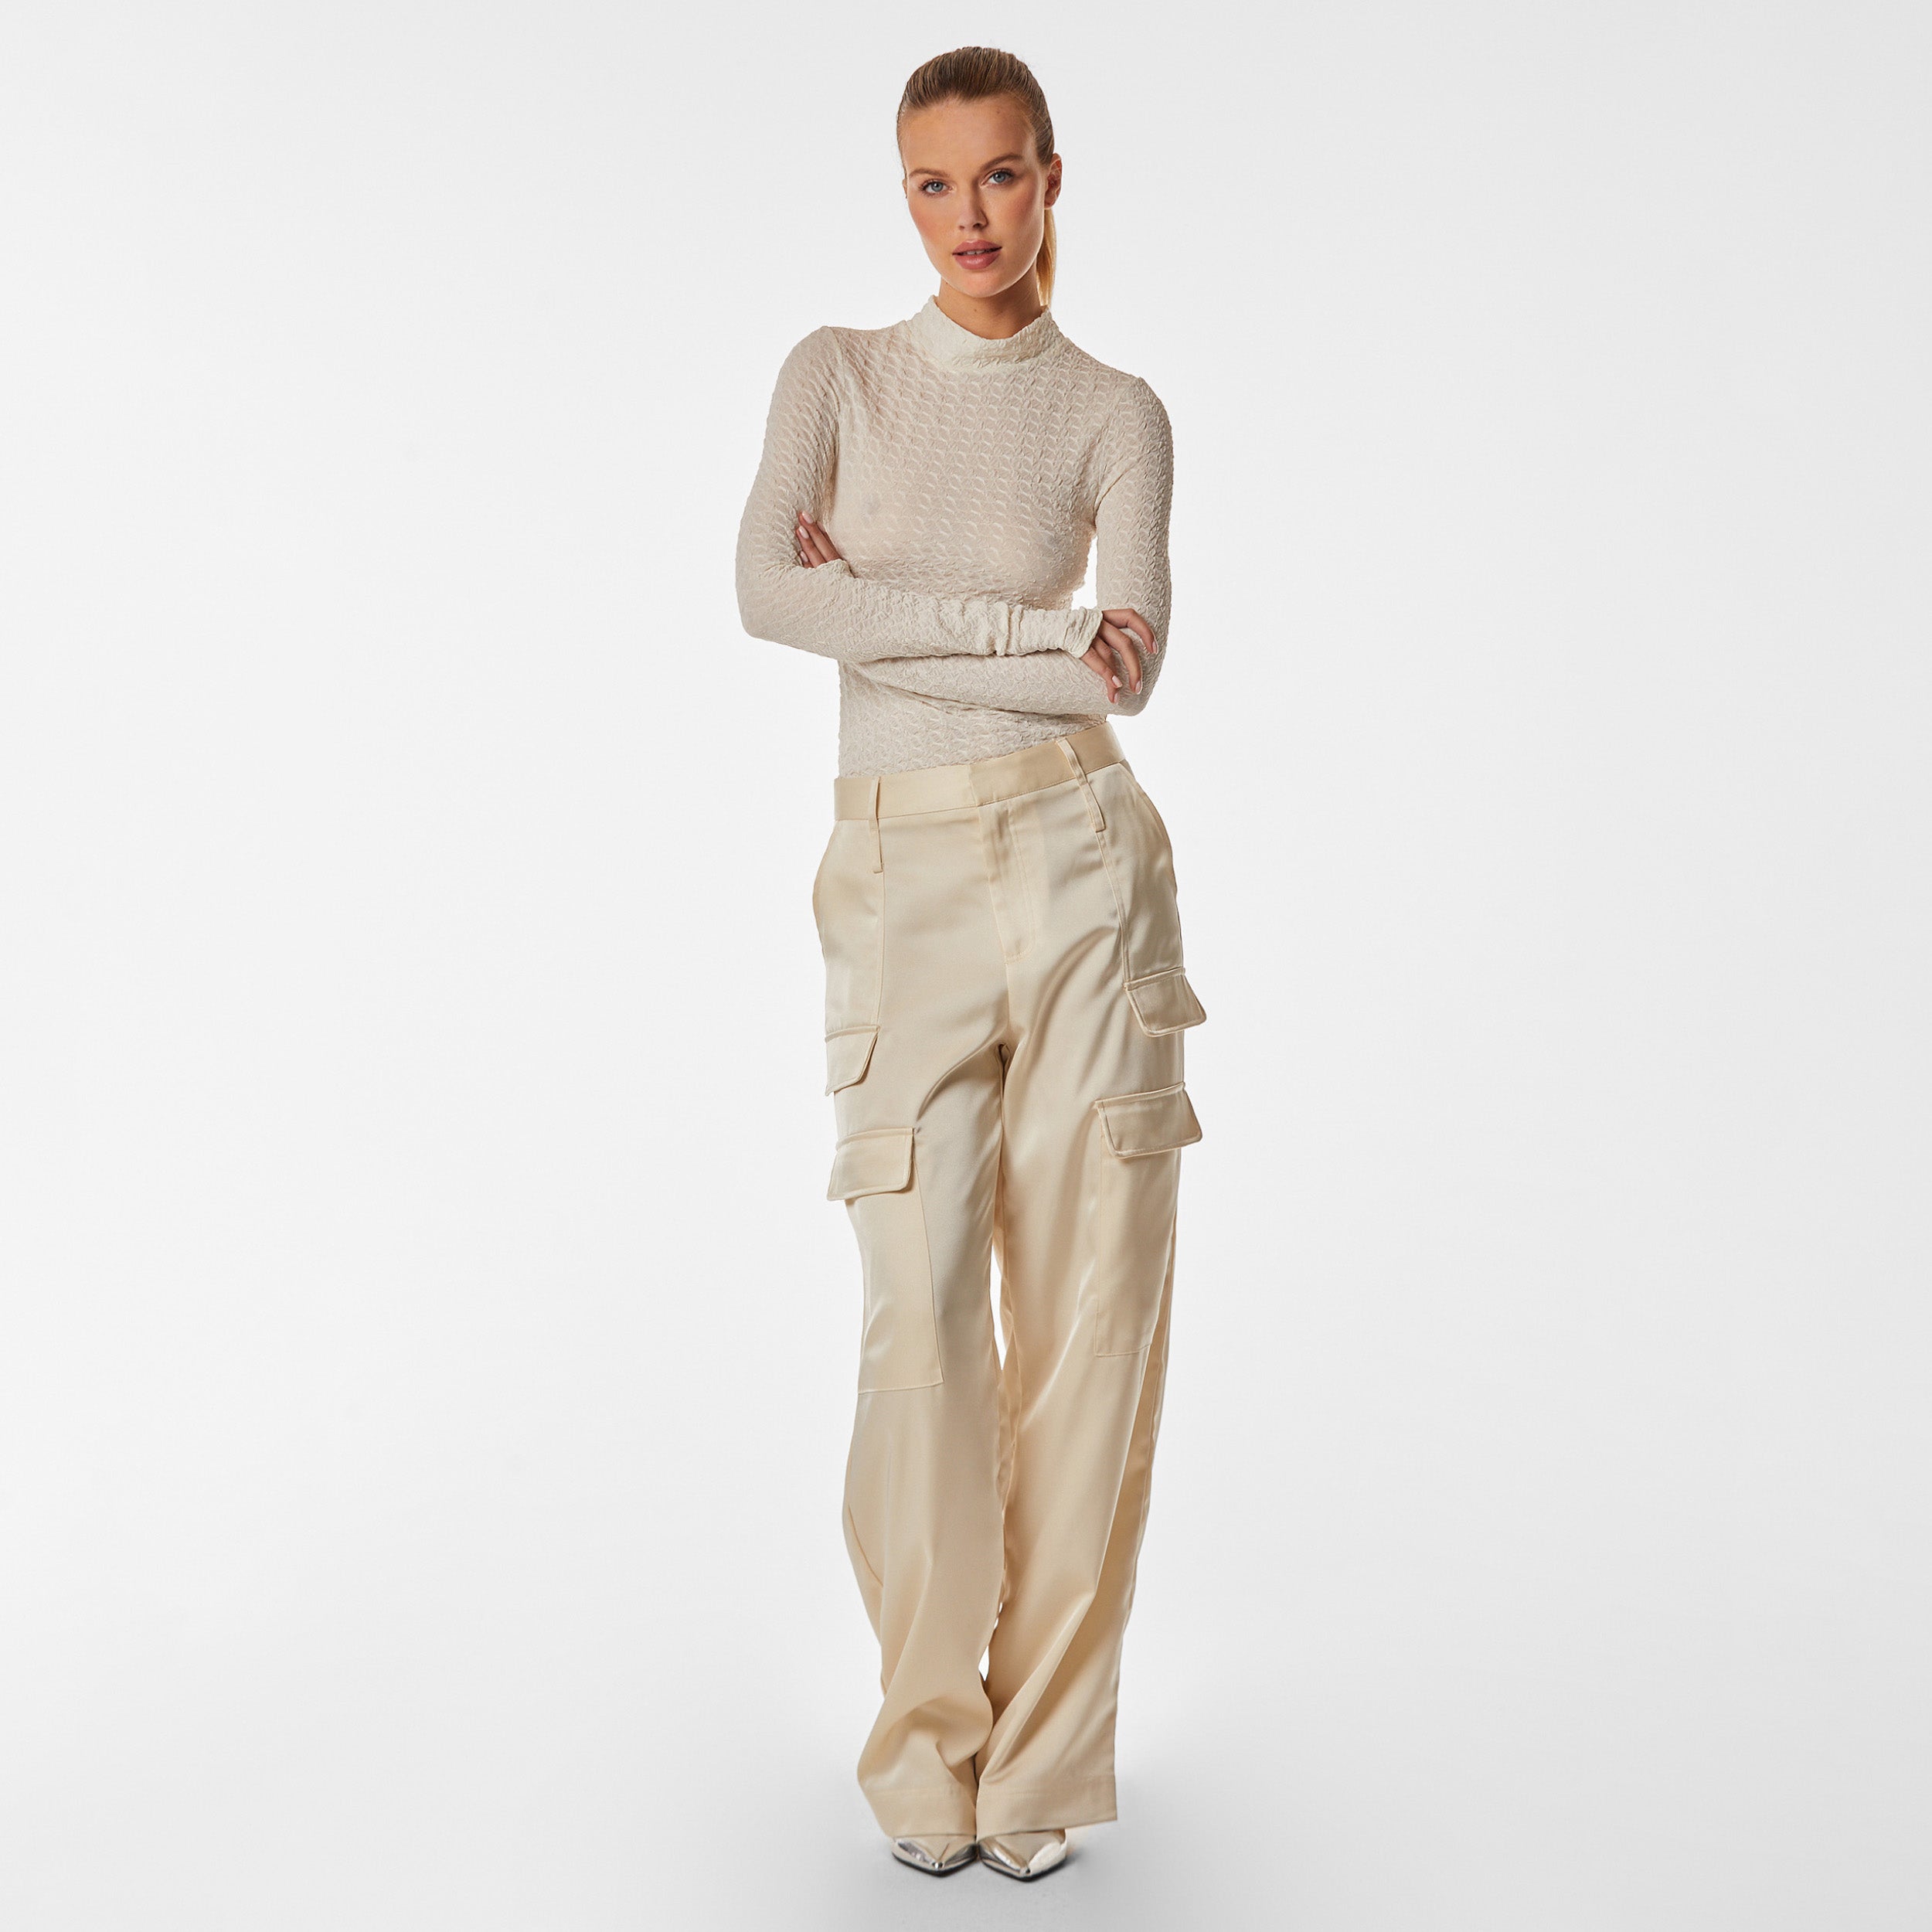 Full body view of woman wearing ivory stretch mesh textured turtleneck sweater and pearl satin cargo pant